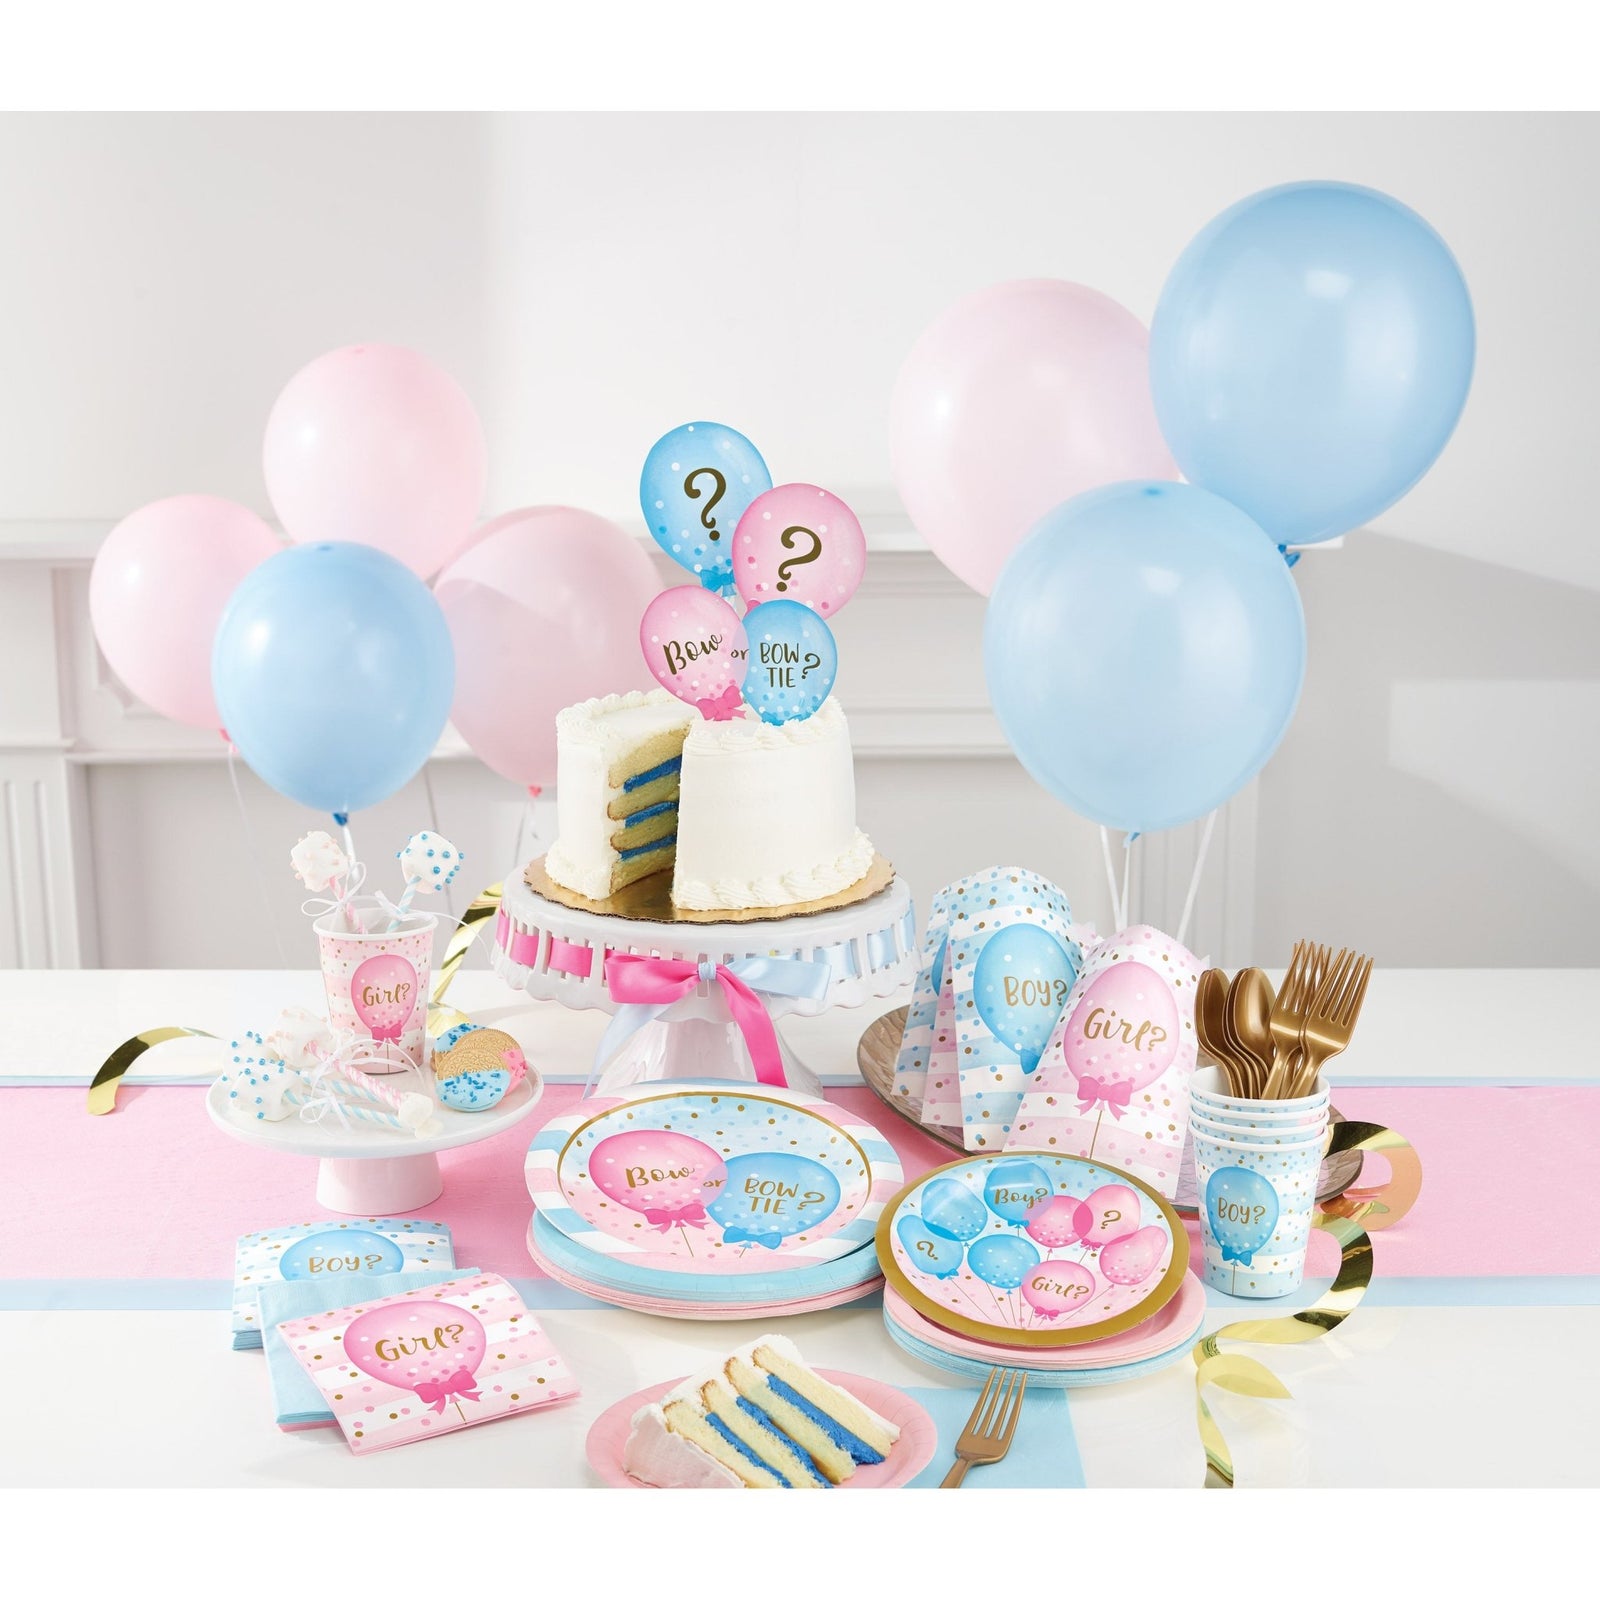 https://cdn.shopify.com/s/files/1/0071/1222/8927/products/gender-reveal-party-plates-774994_1600x.jpg?v=1691025786